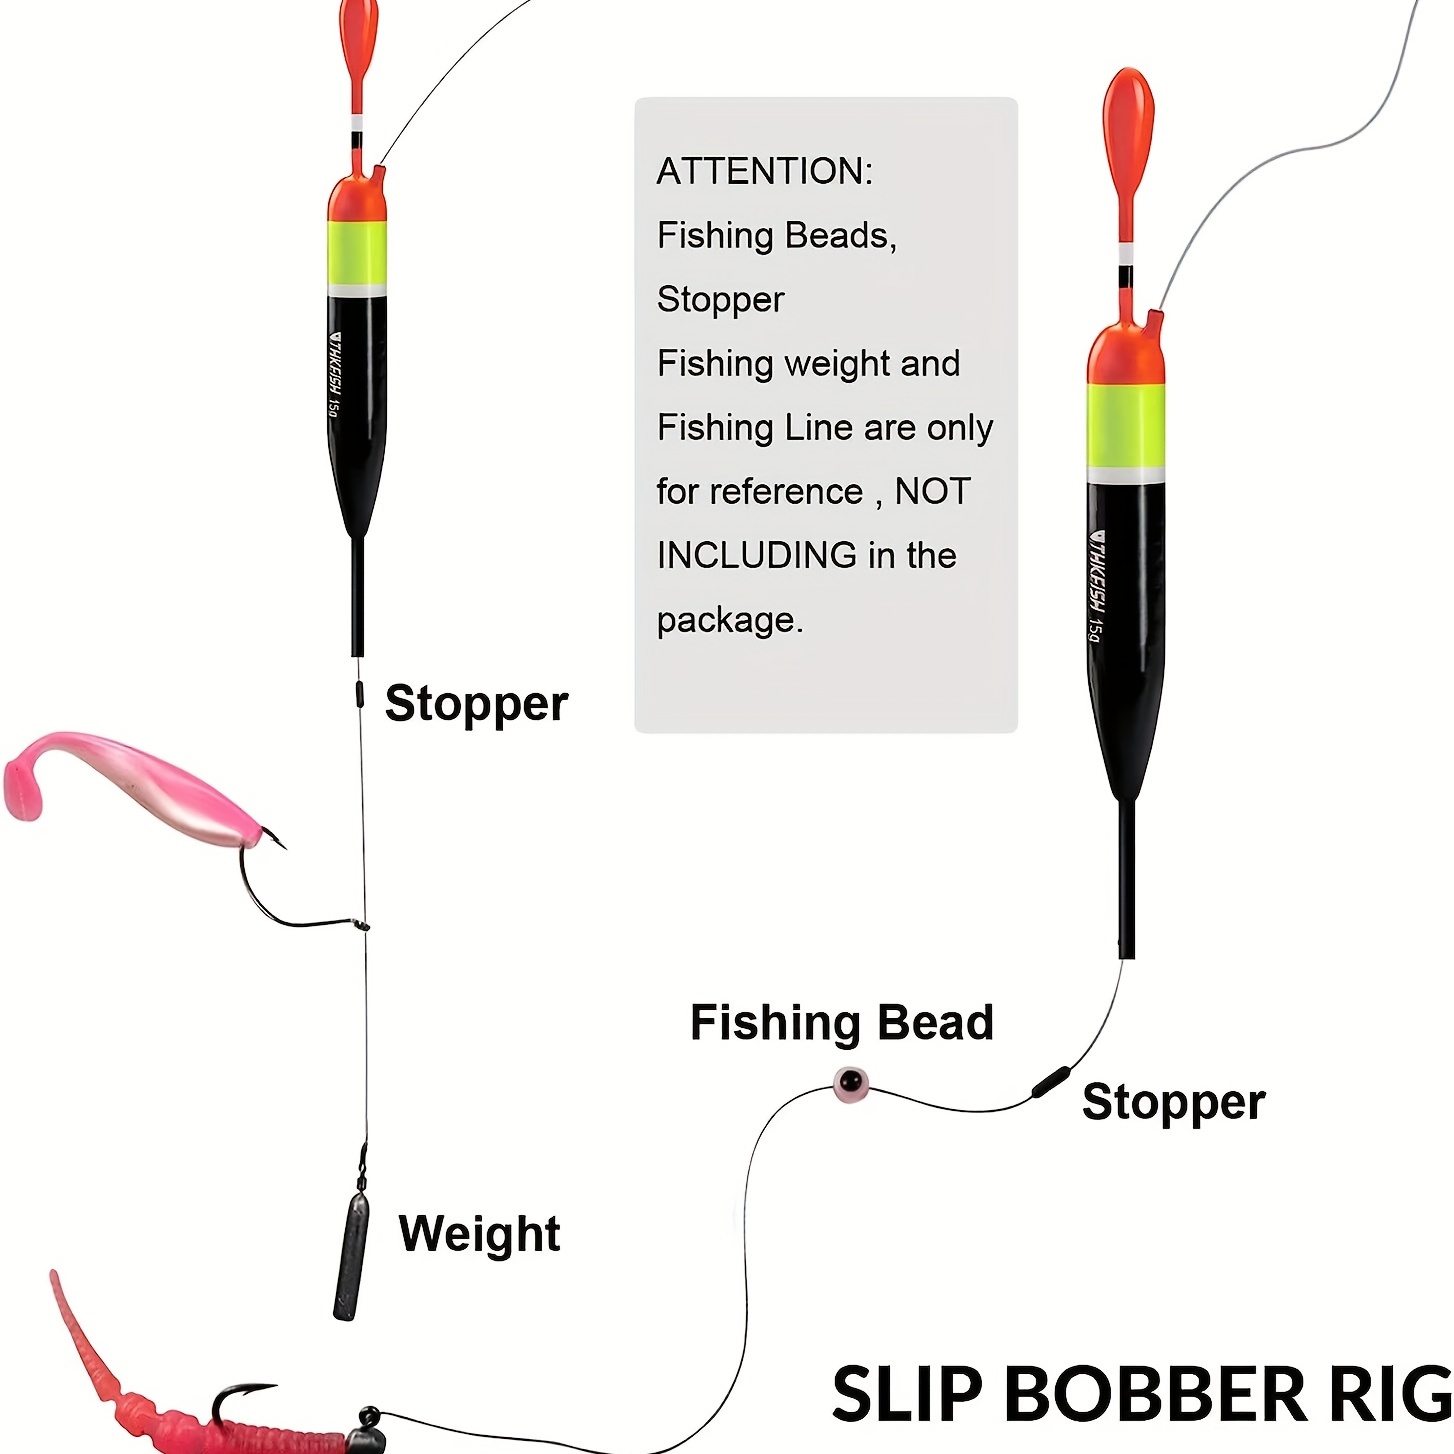  Gourami Slip Bobbers Kit,Balsa Wood Slide Floats with Bobbers  Stops,Fishing Cork for Crappie Panfish Bass Trout : Sports & Outdoors